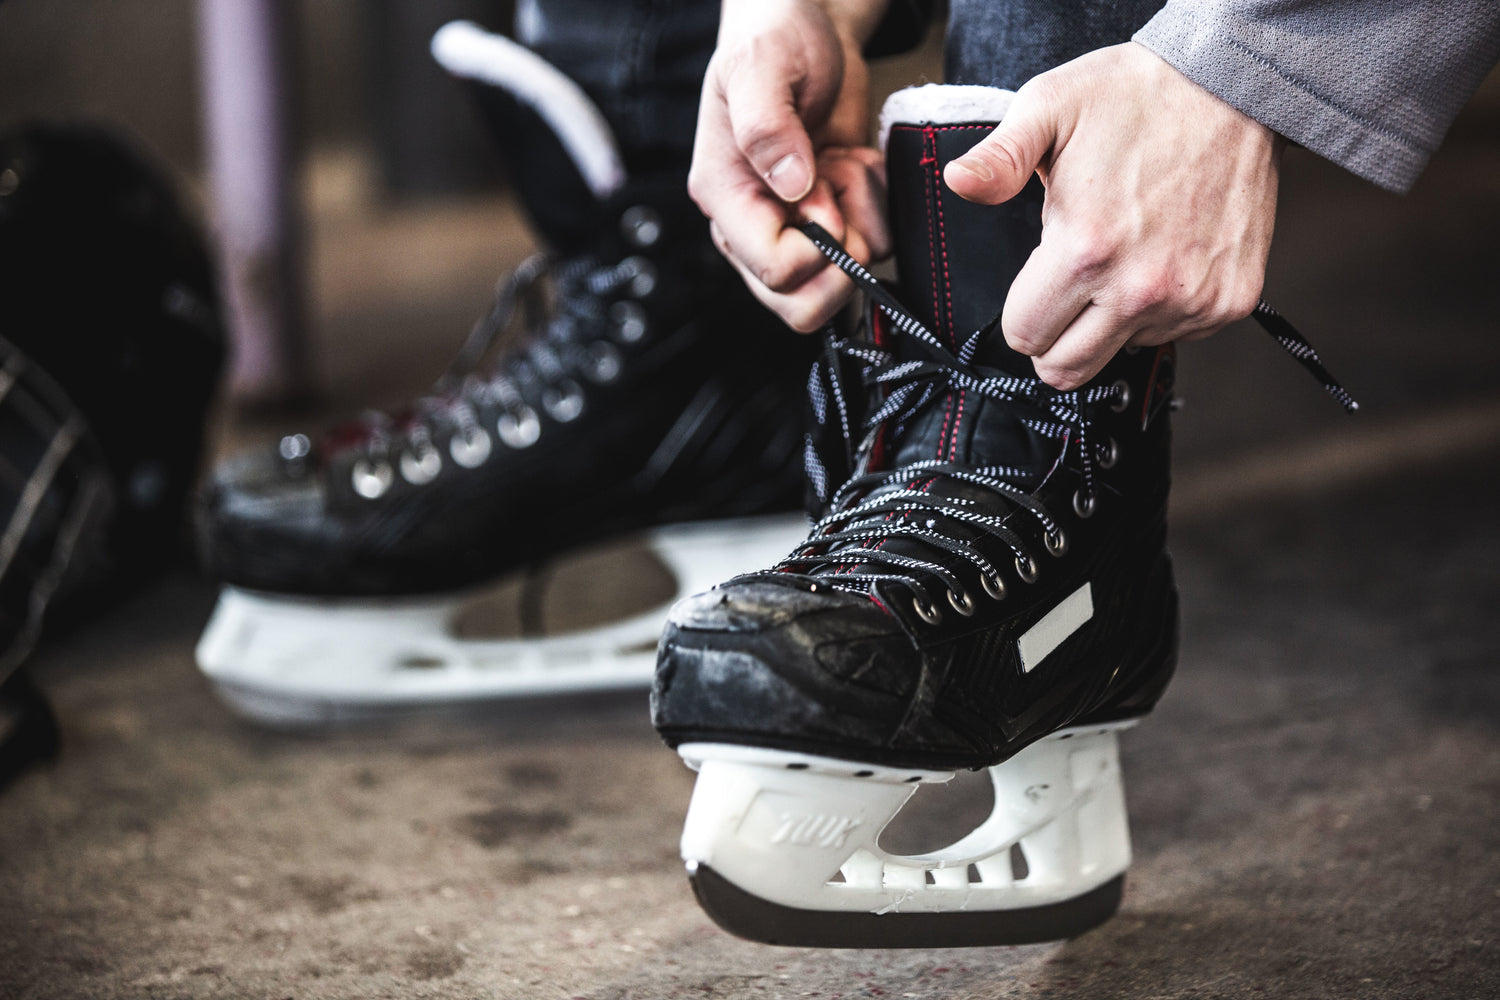 Image of a person lacing their hockey skates while wearing our socks